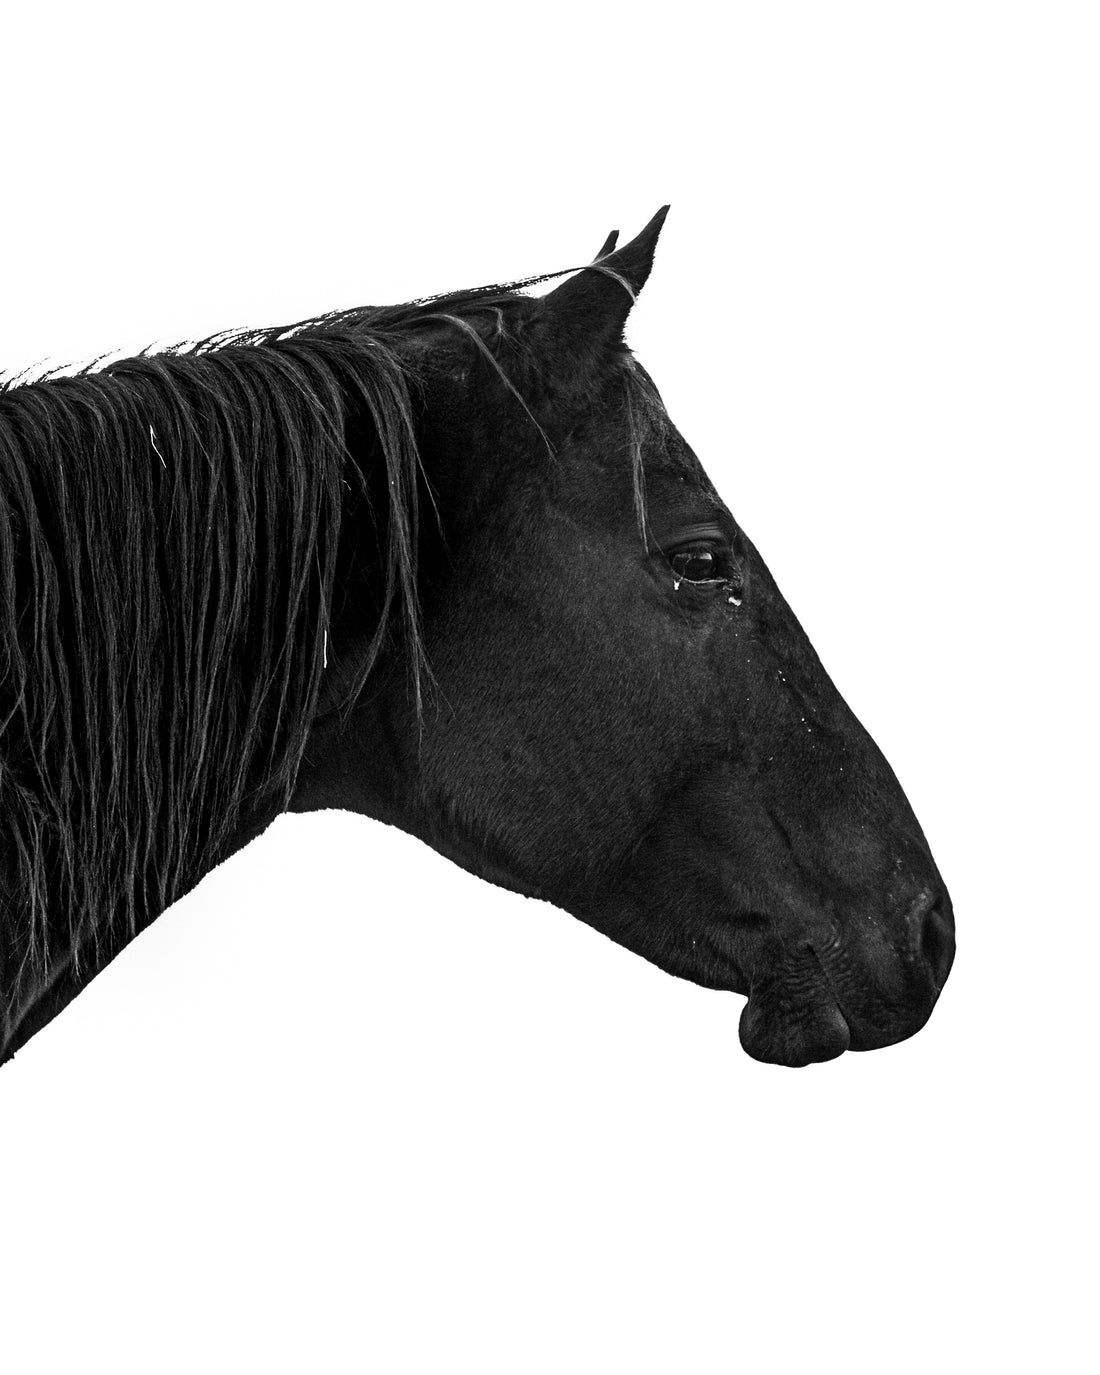 A black and white photo of an all black horse. Ethan Oberst Photography